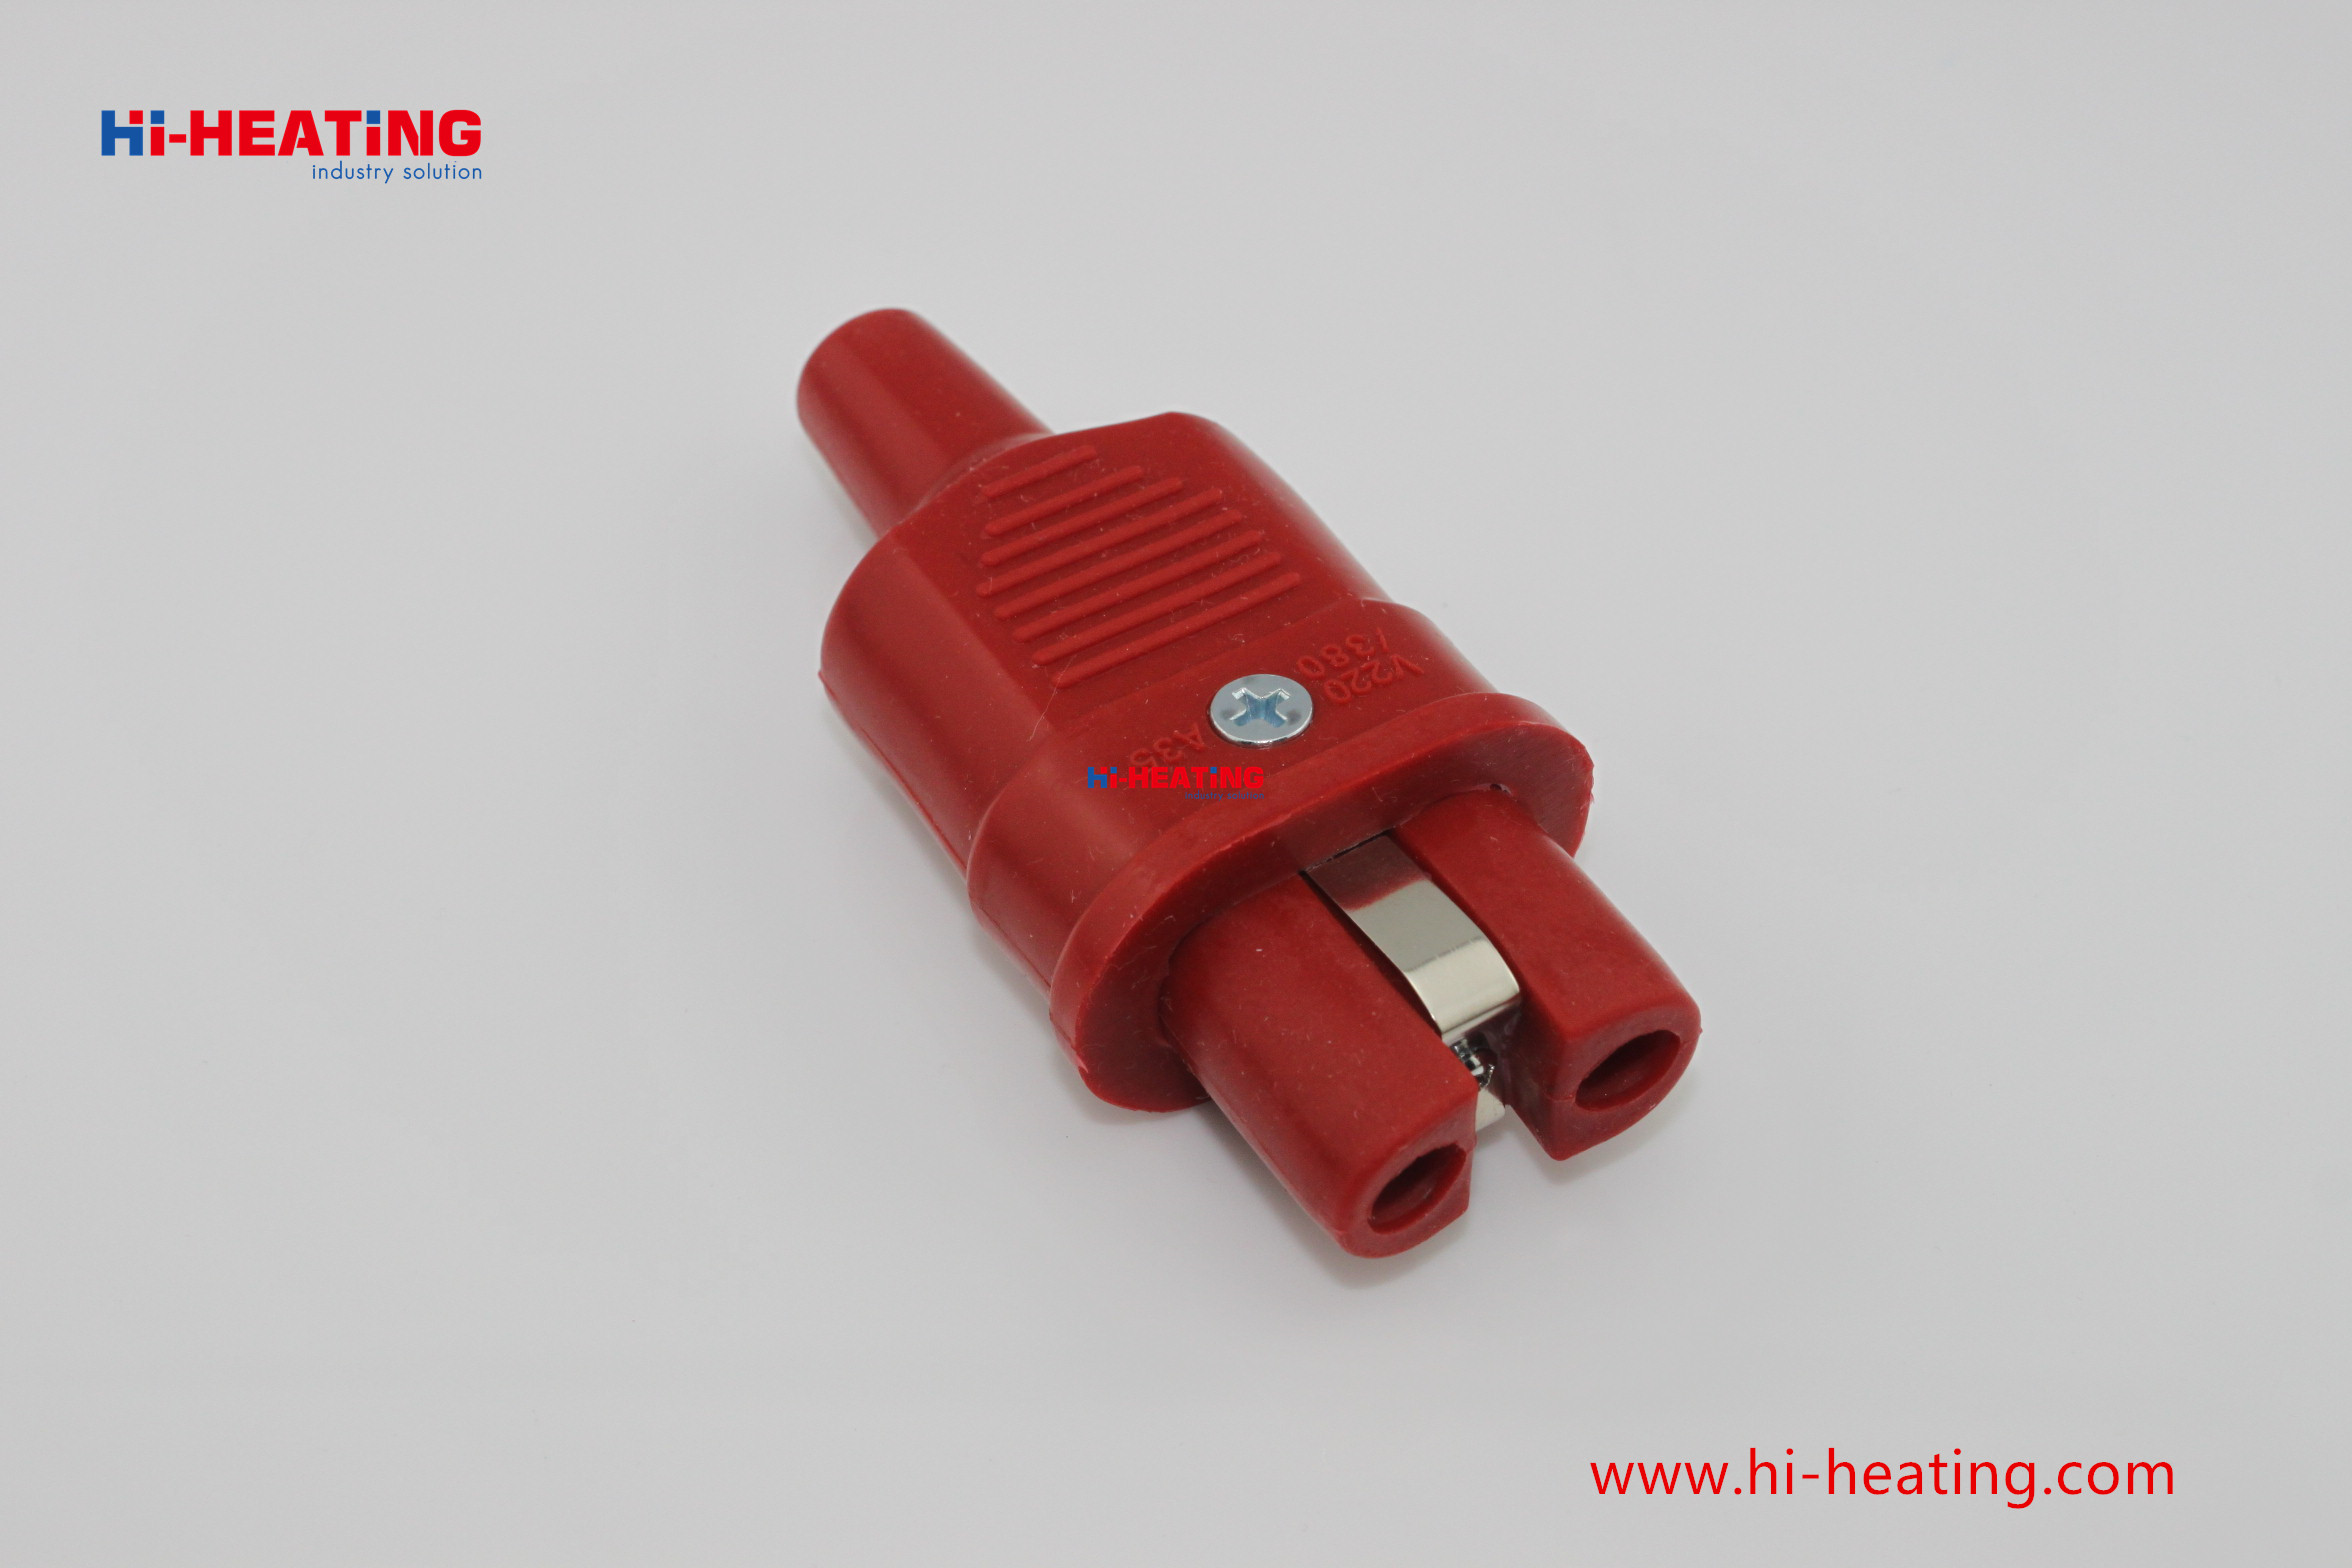 2022 years hot sales high temperature silicon plug good quality - 副本